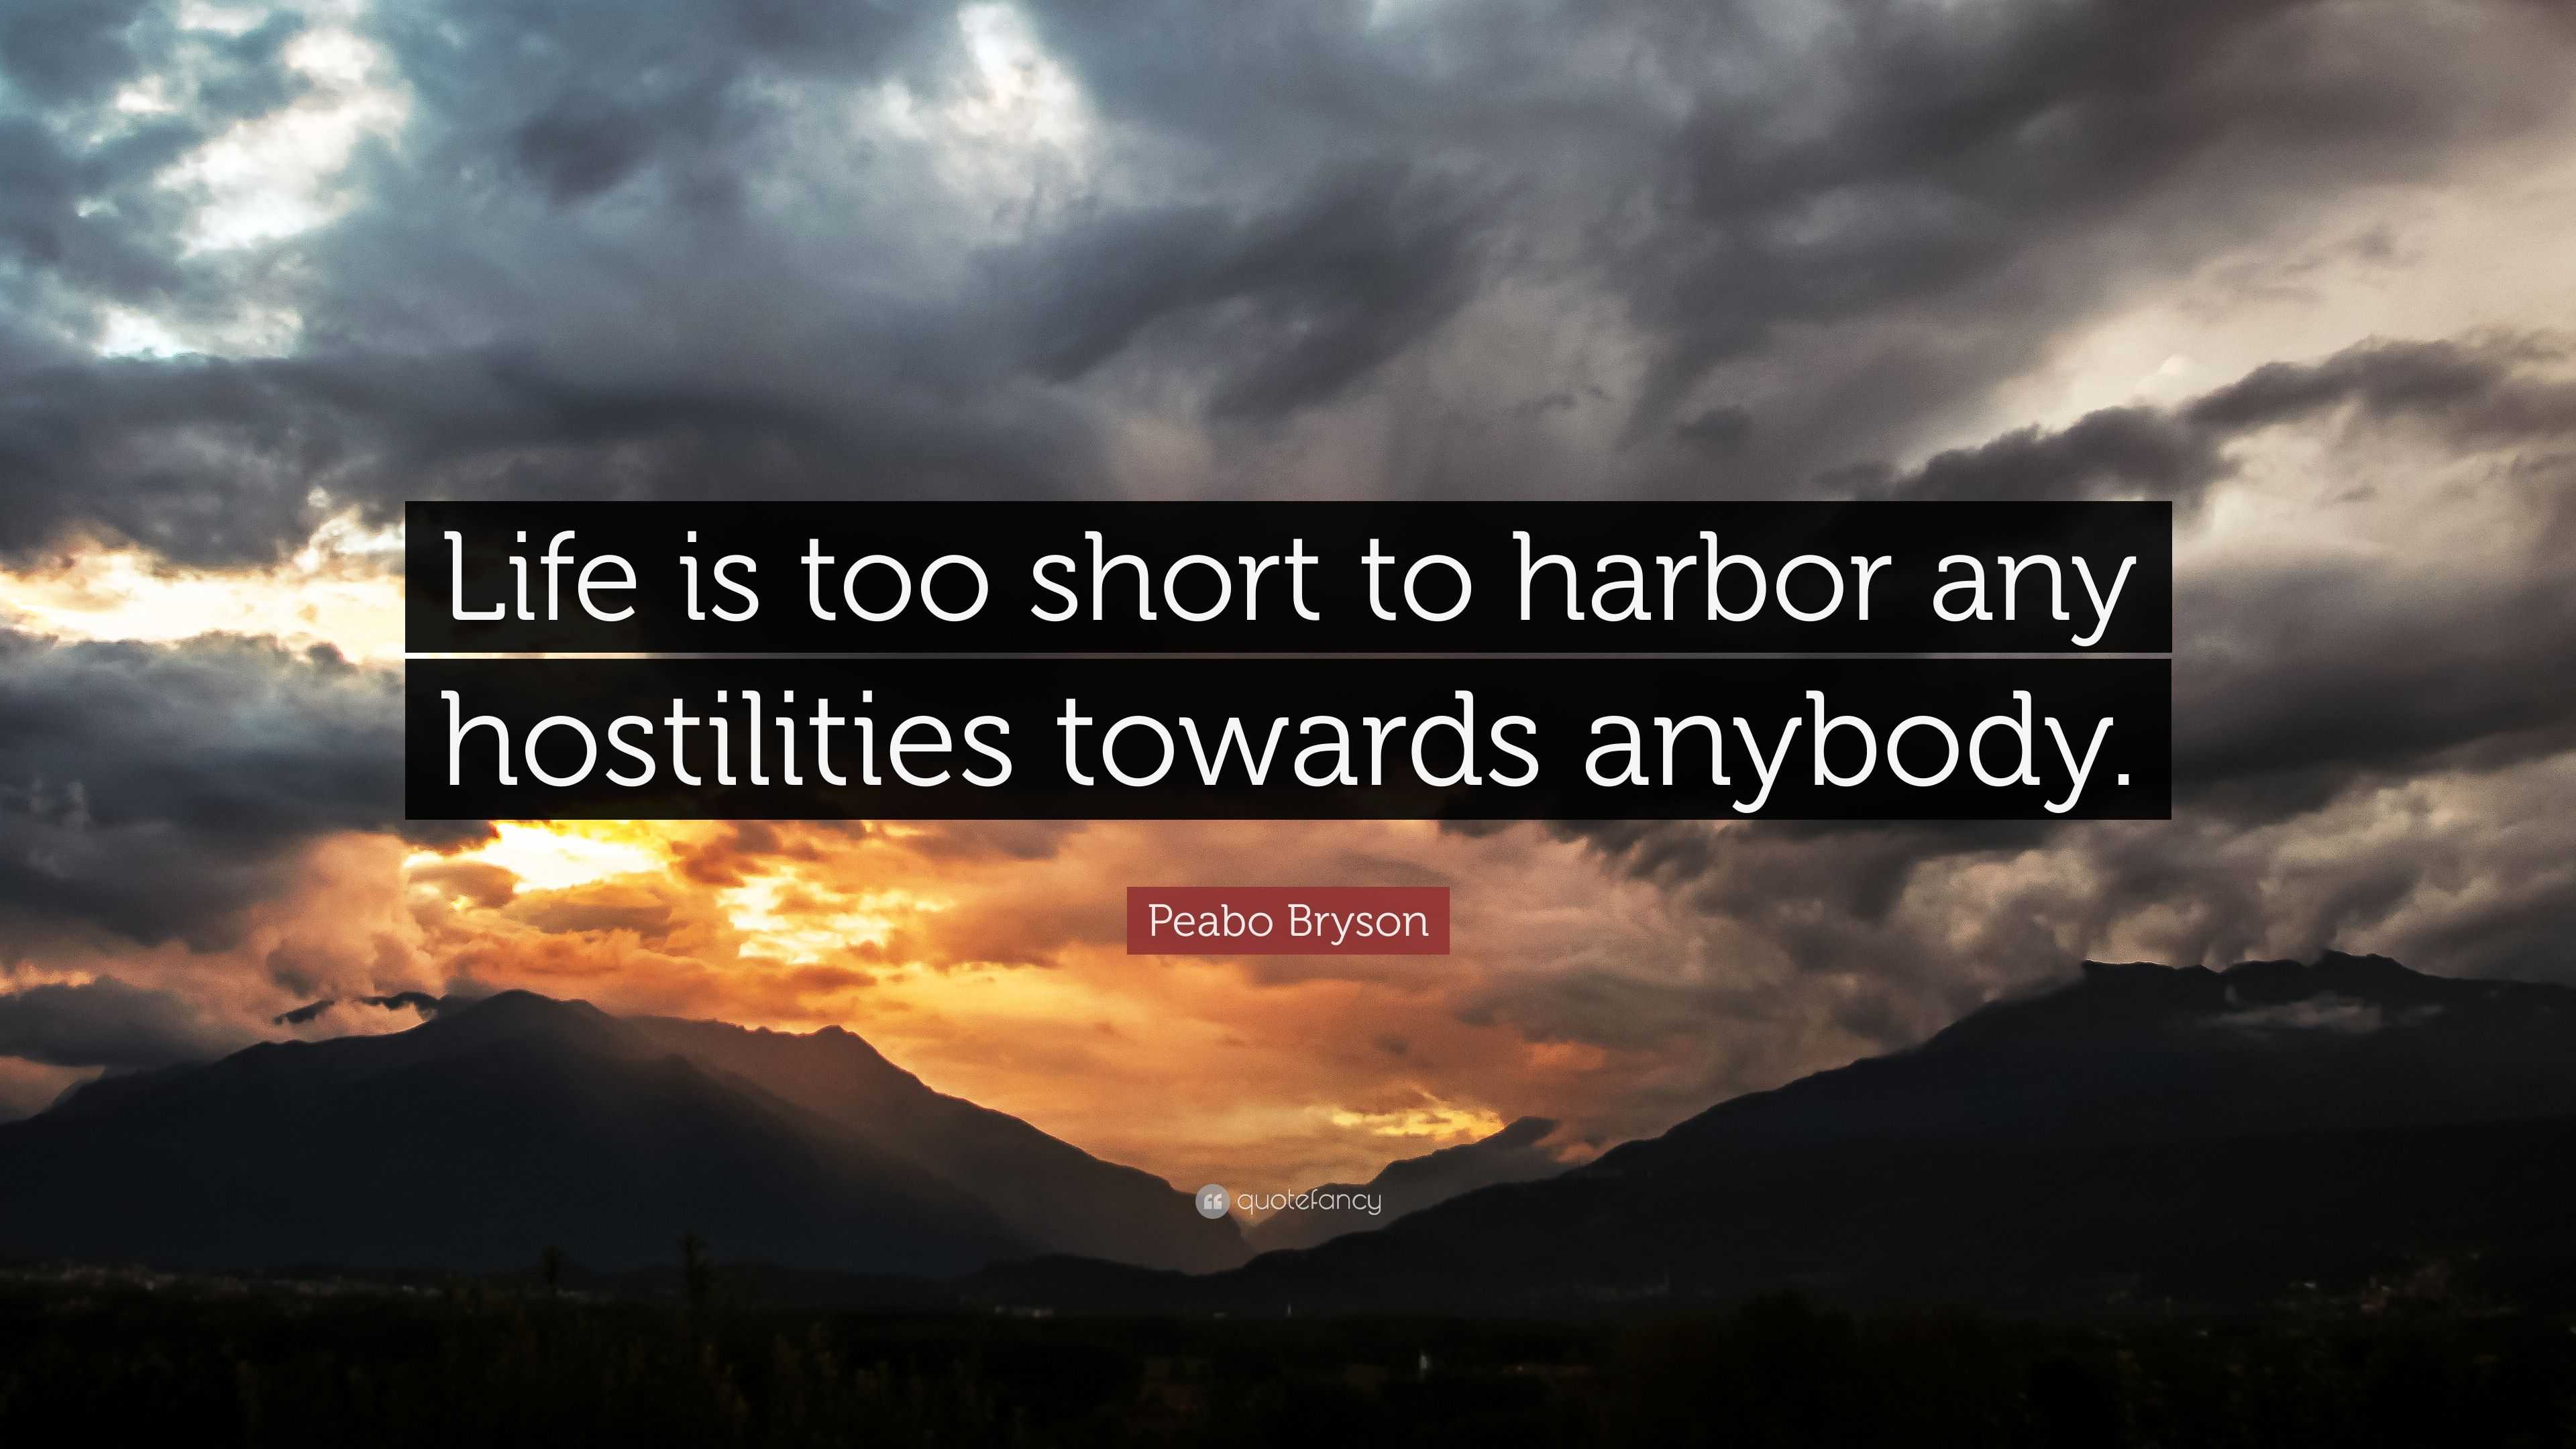 Peabo Bryson Quote: “Life is too short to harbor any hostilities ...